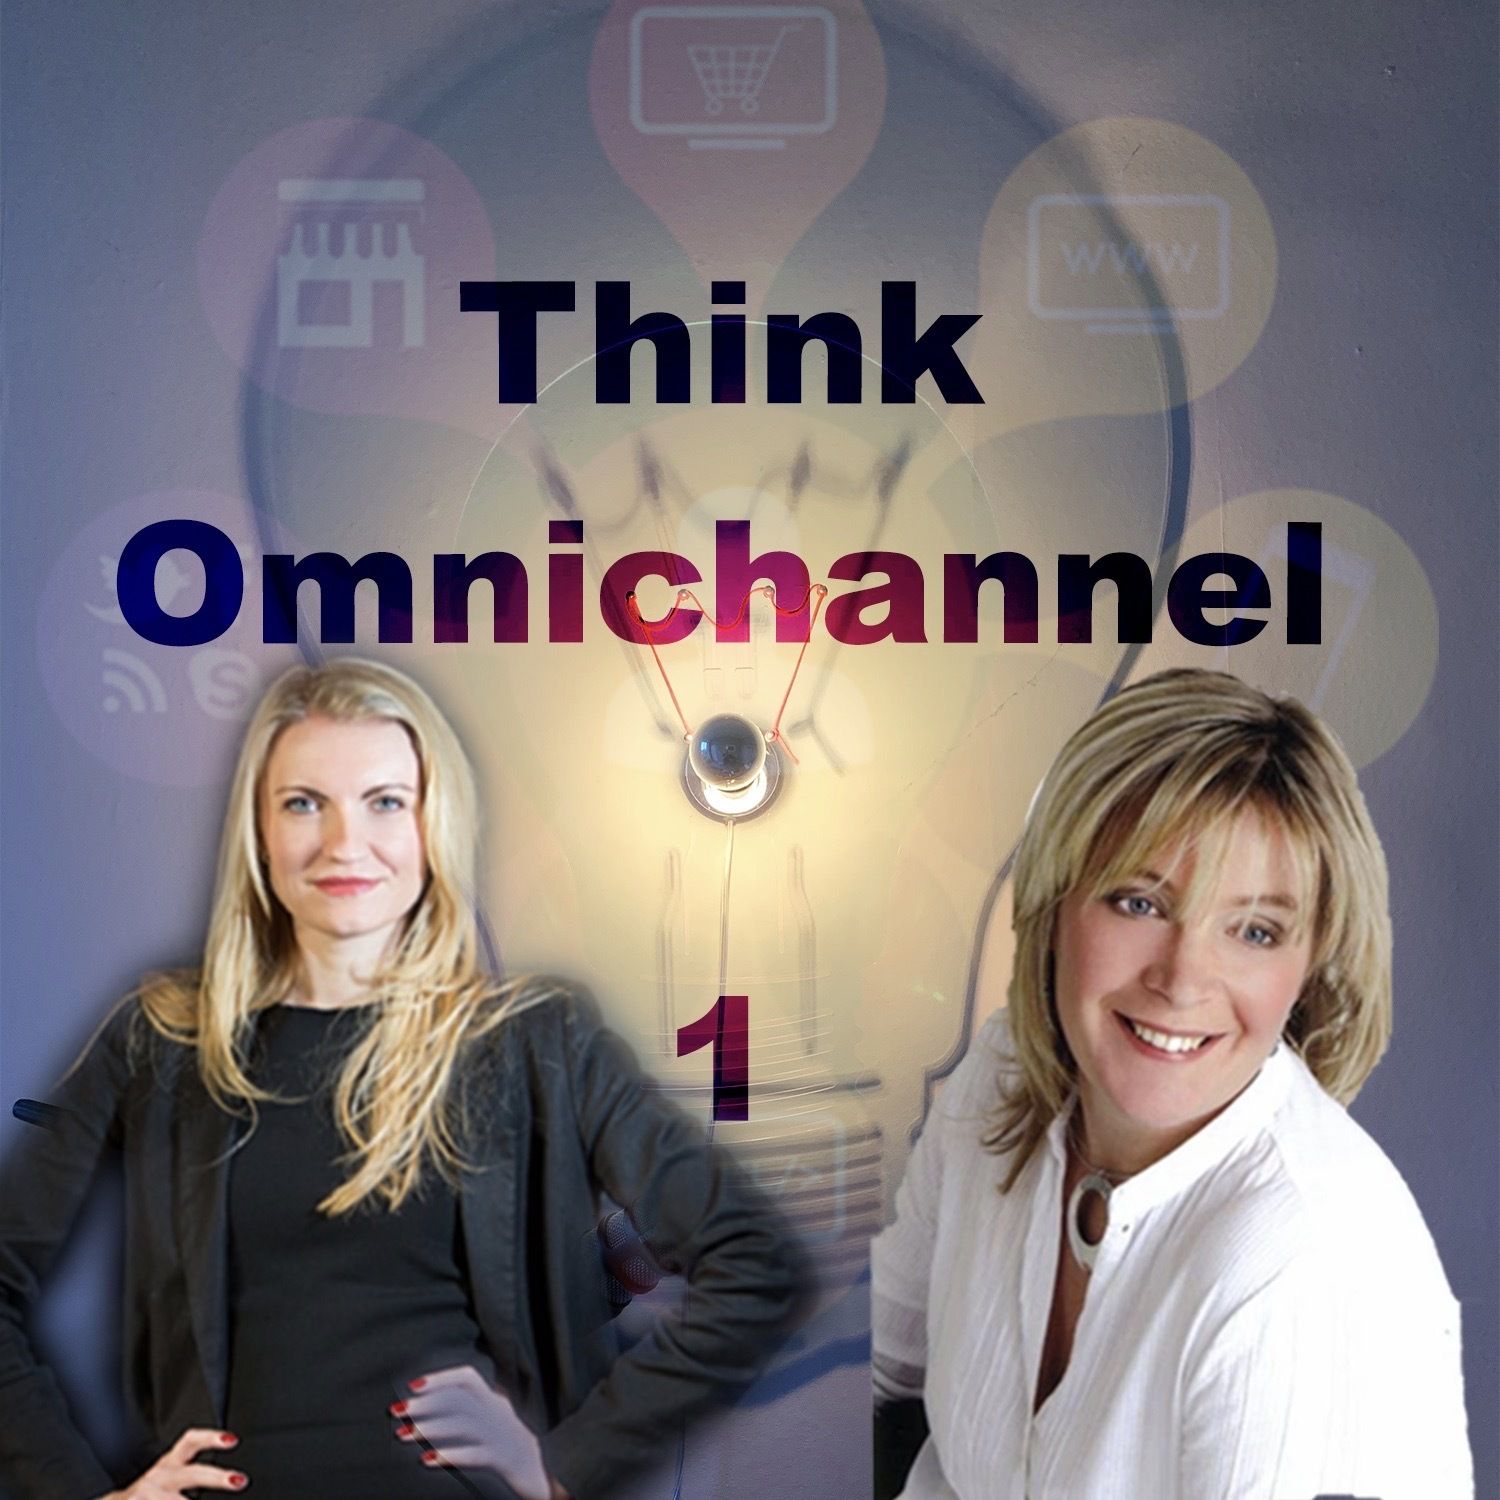 S1 Ep1: Think Omnichannel Episode 1 | Psychology, Insights & emotional connections | Kate Nightingale & Cathy McCabe